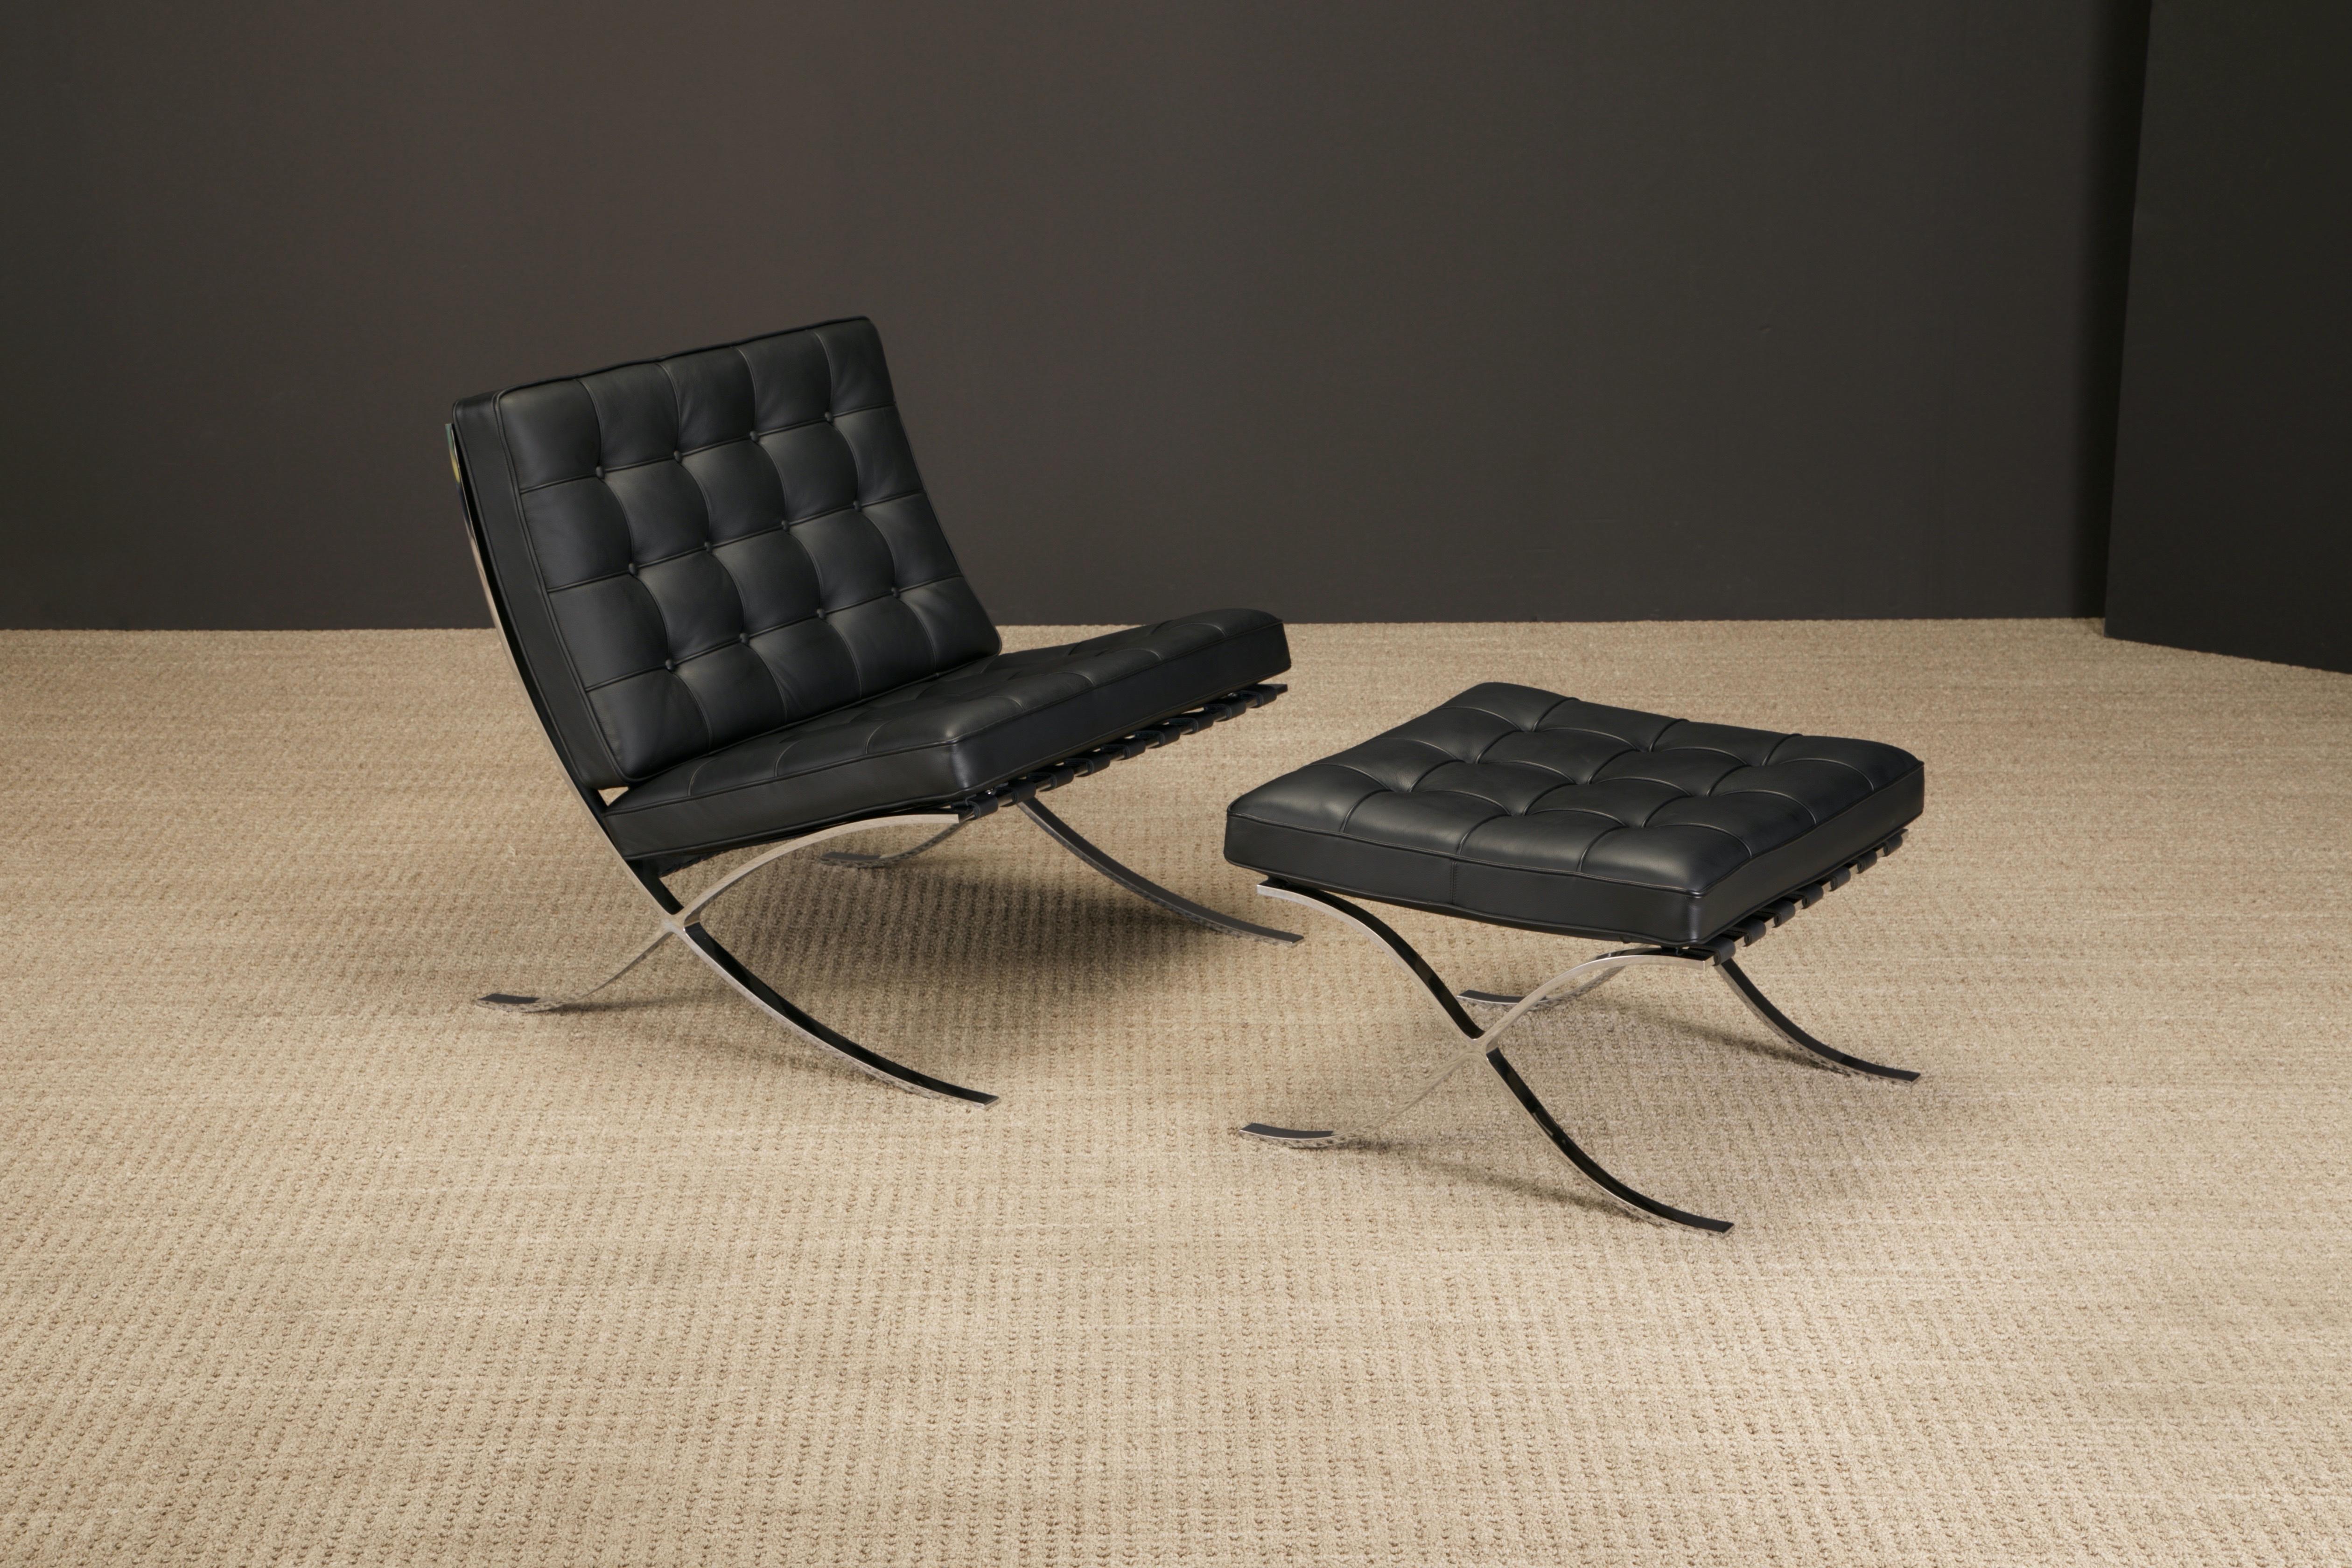 Mid-Century Modern Barcelona Lounge Chair & Ottoman by Mies van der Rohe for Knoll Studios, Signed